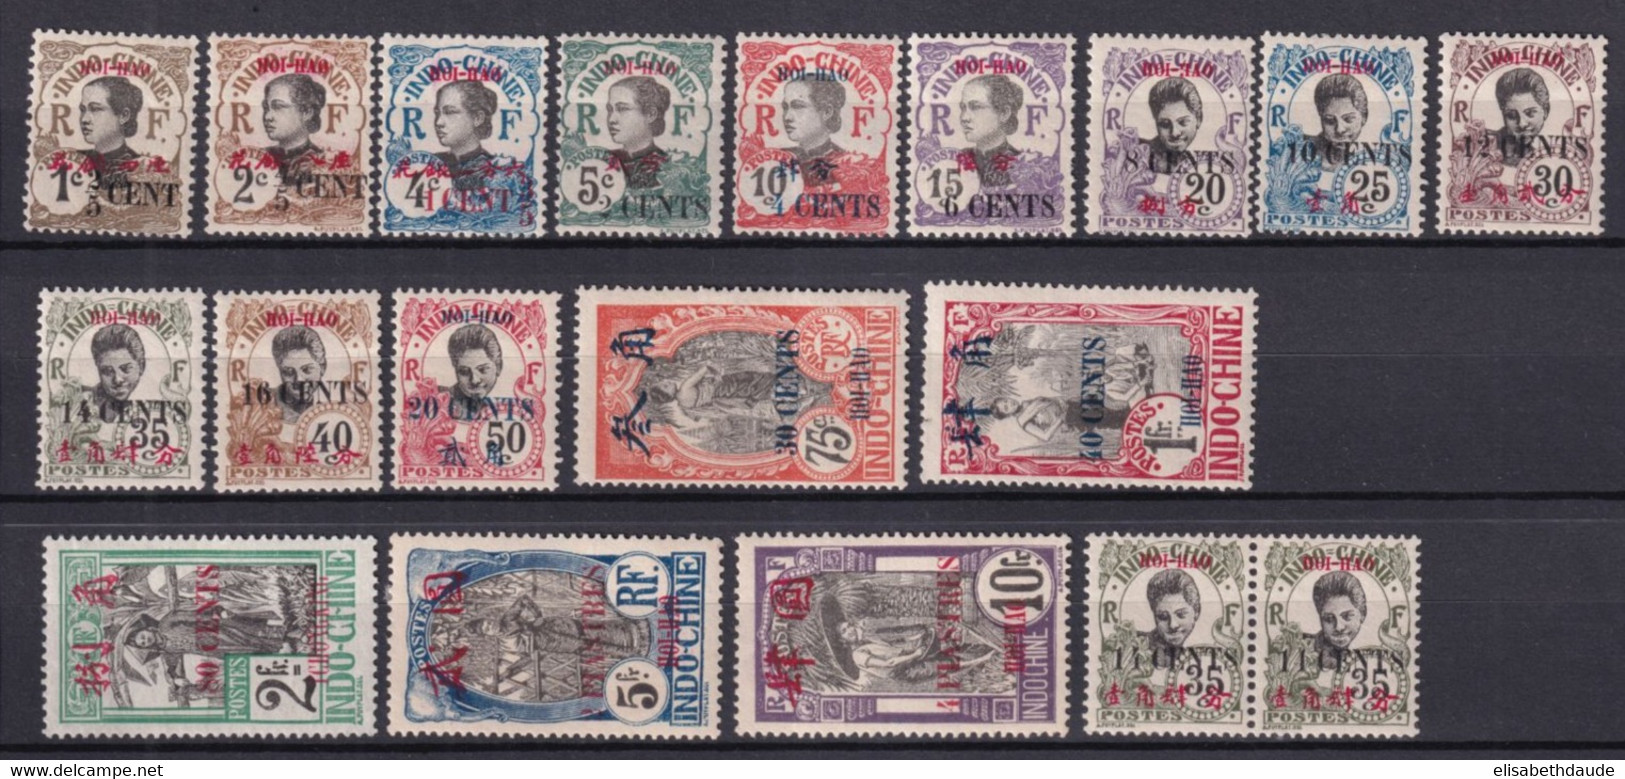 HOI-HAO (CHINE) - SERIE COMPLETE YVERT N°66/82 + PAIRE 75aa * MLH - COTE YVERT = 503 EUR - 10F SIGNE BRUN ! - Nuevos